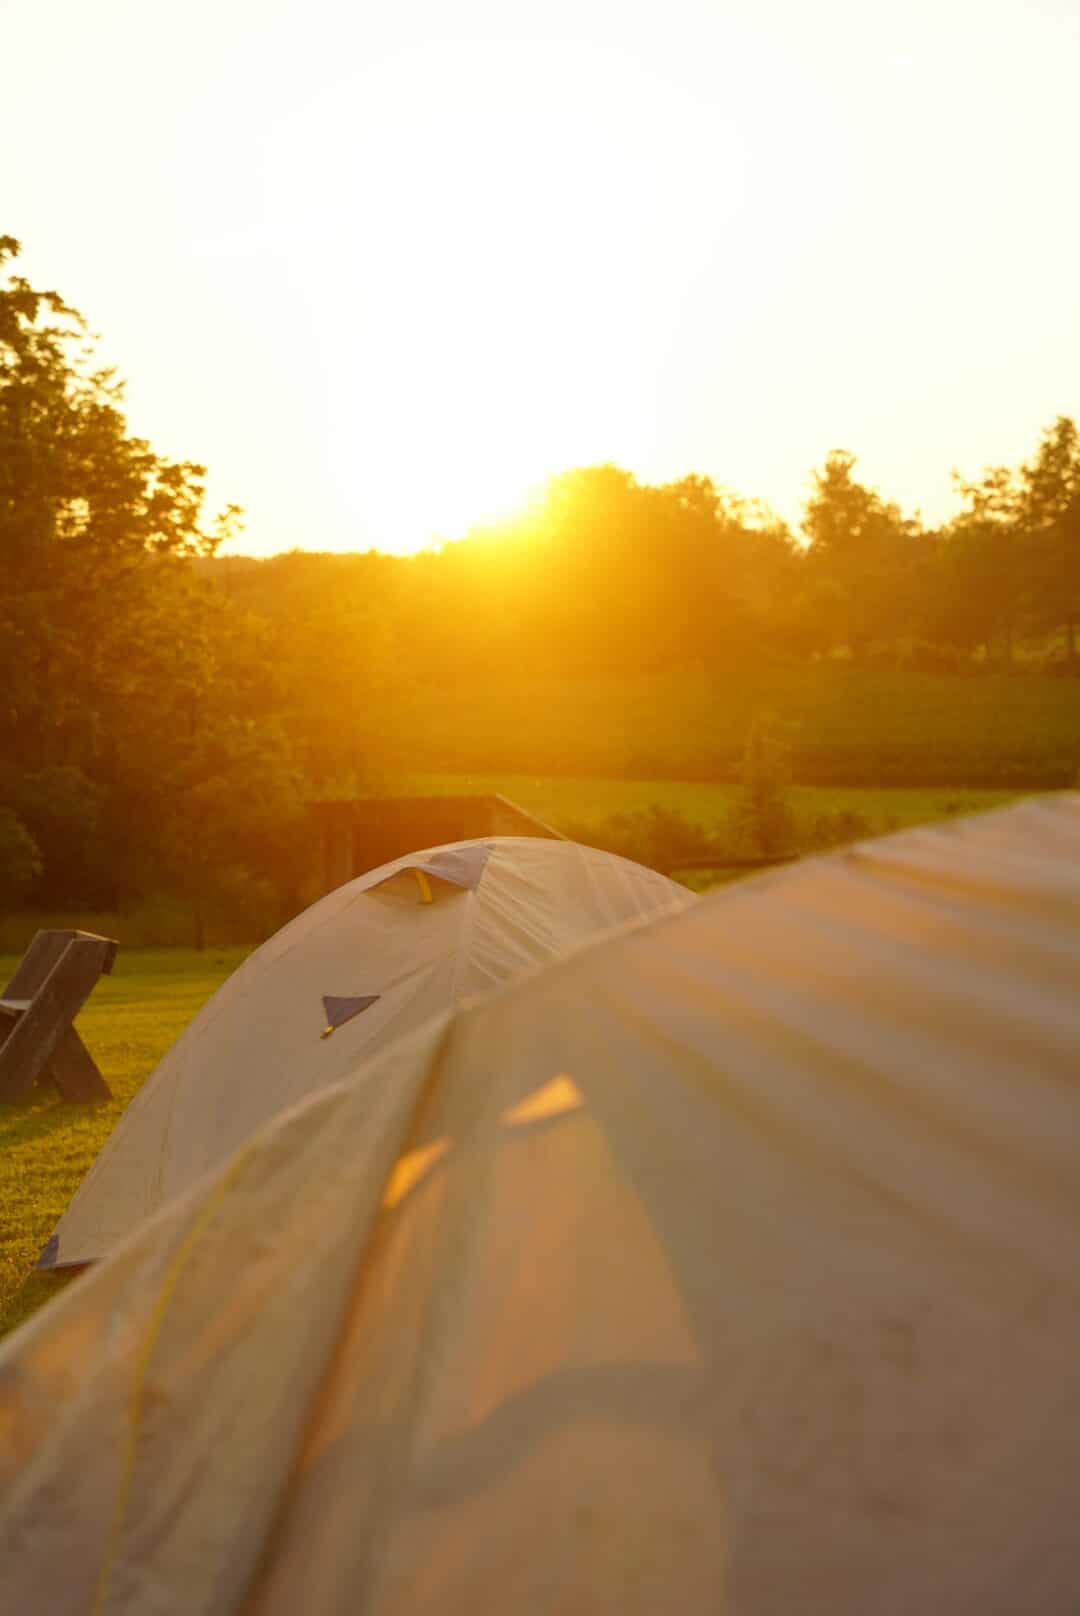 Sunset over dome tents in a field at Crow's Nest Preserve